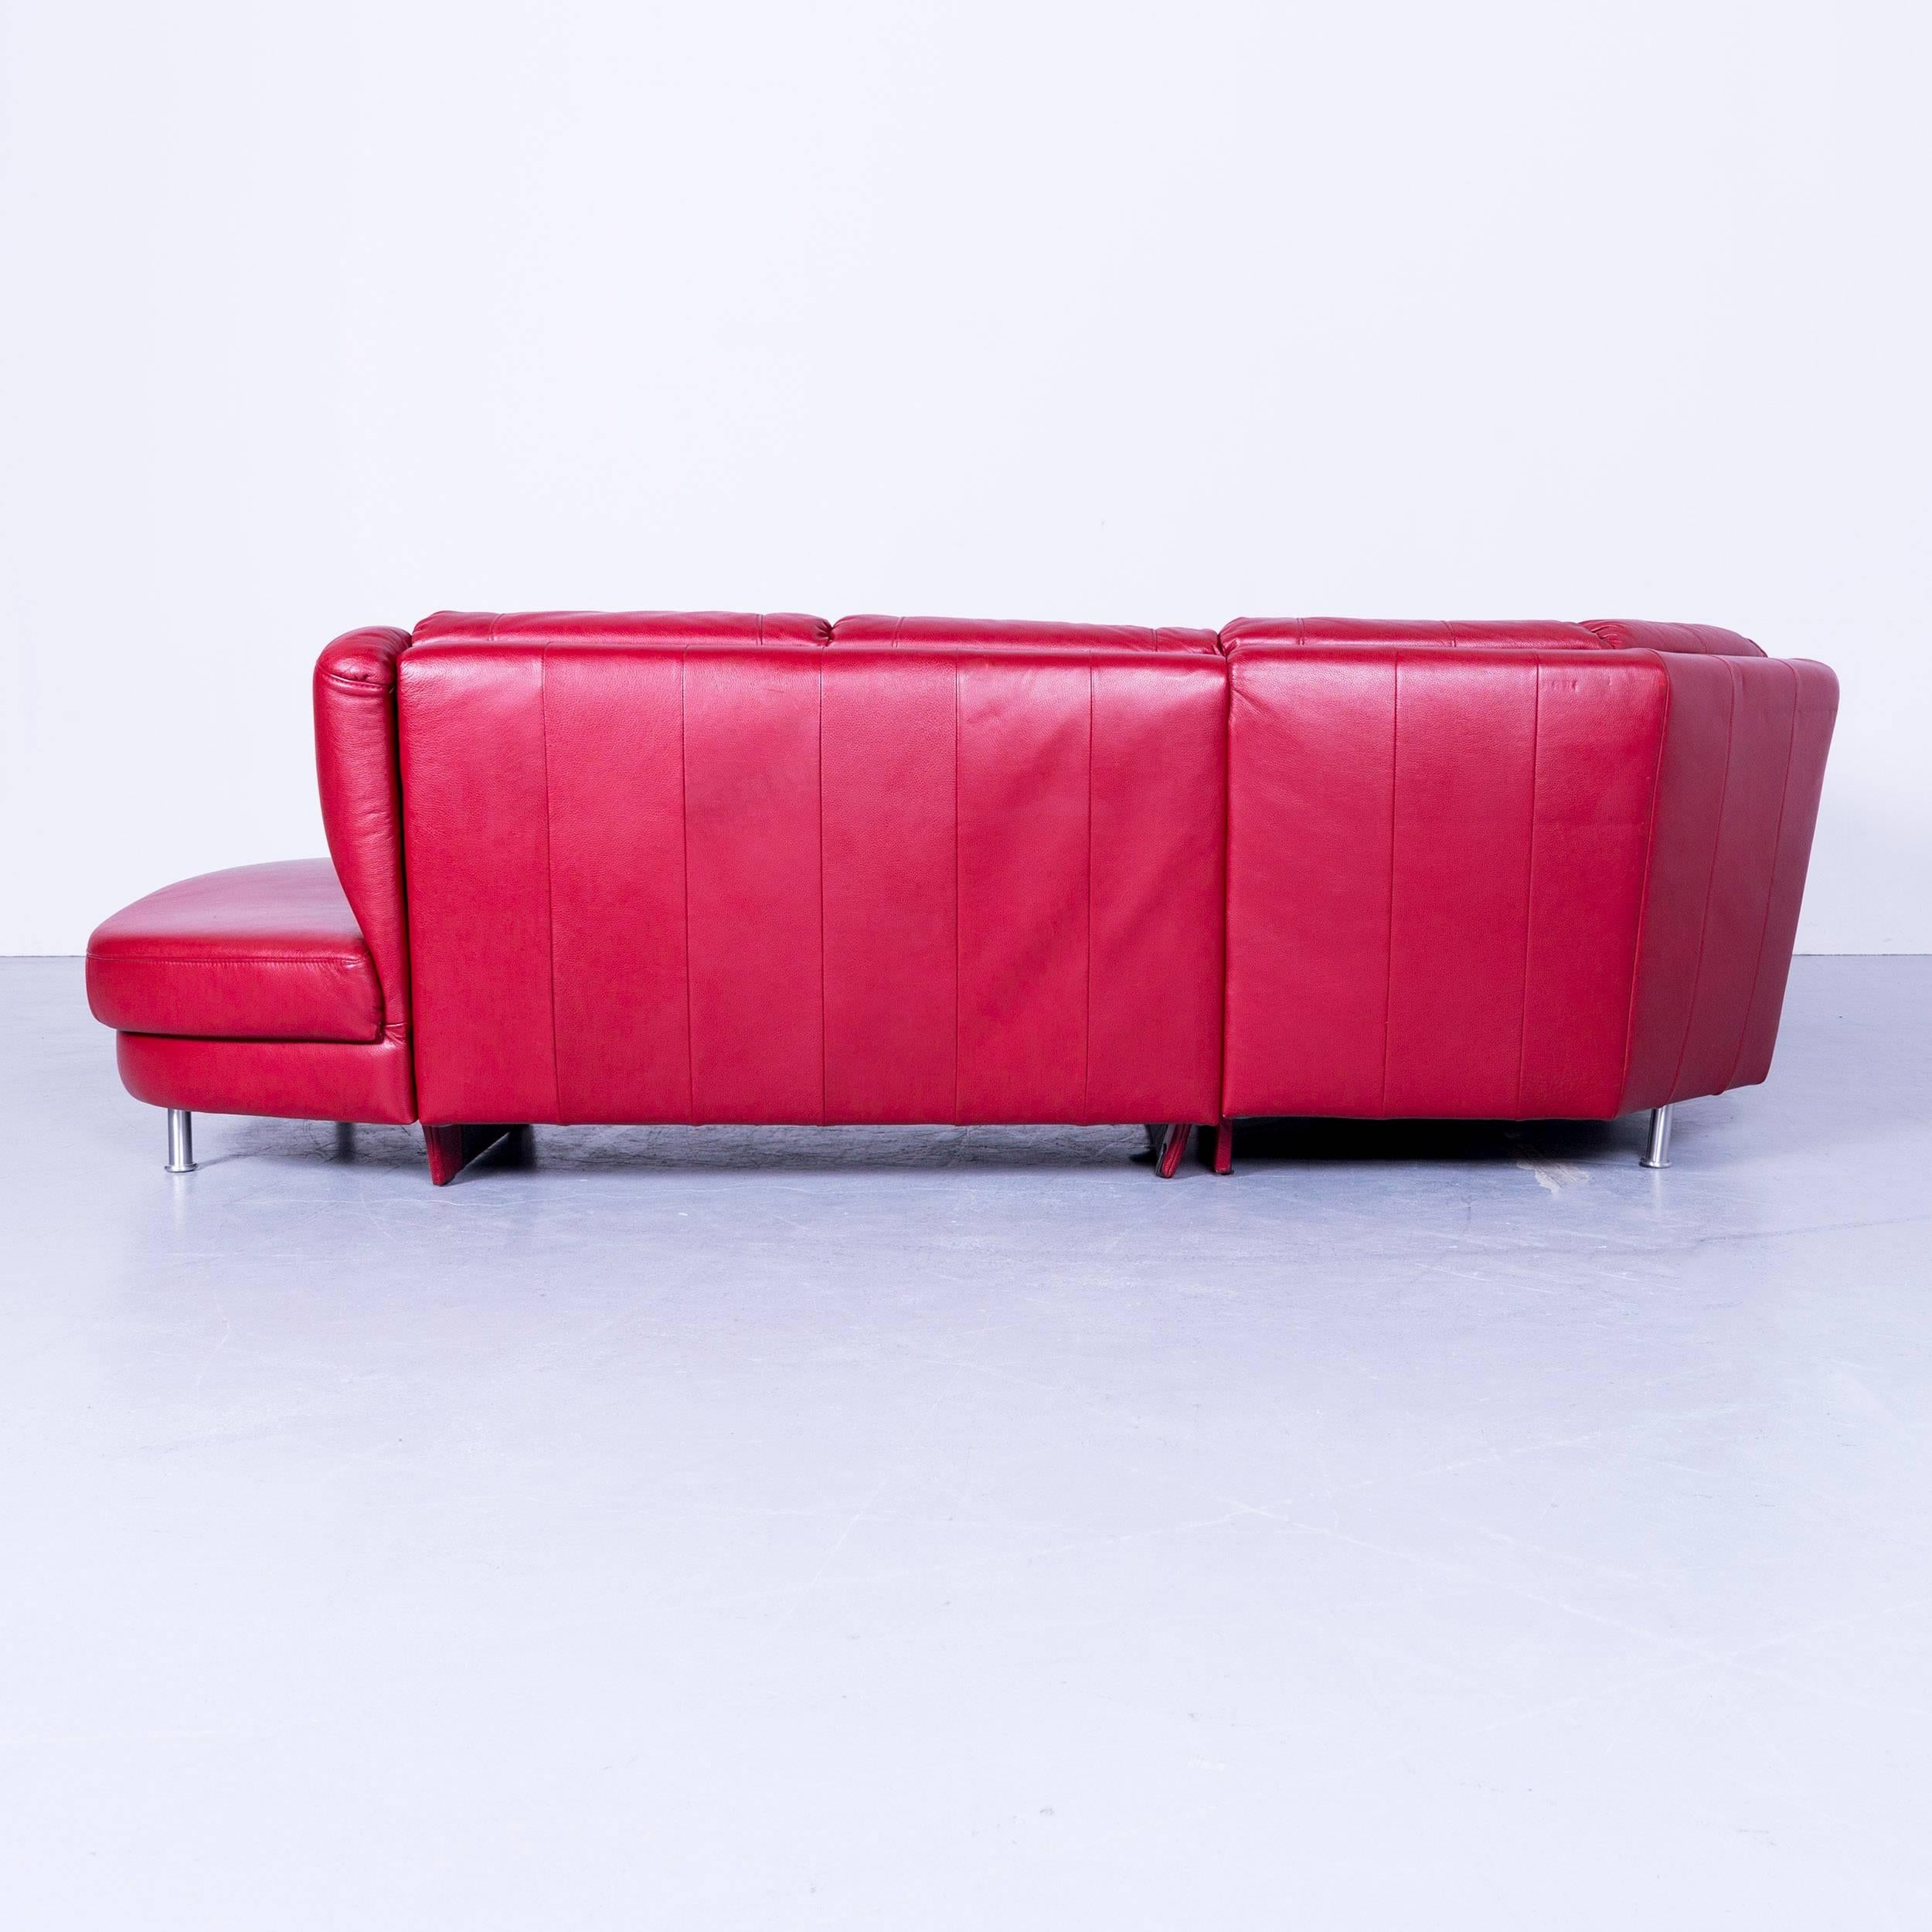 Himolla Corner Sofa Leather Red Modern Couch 4